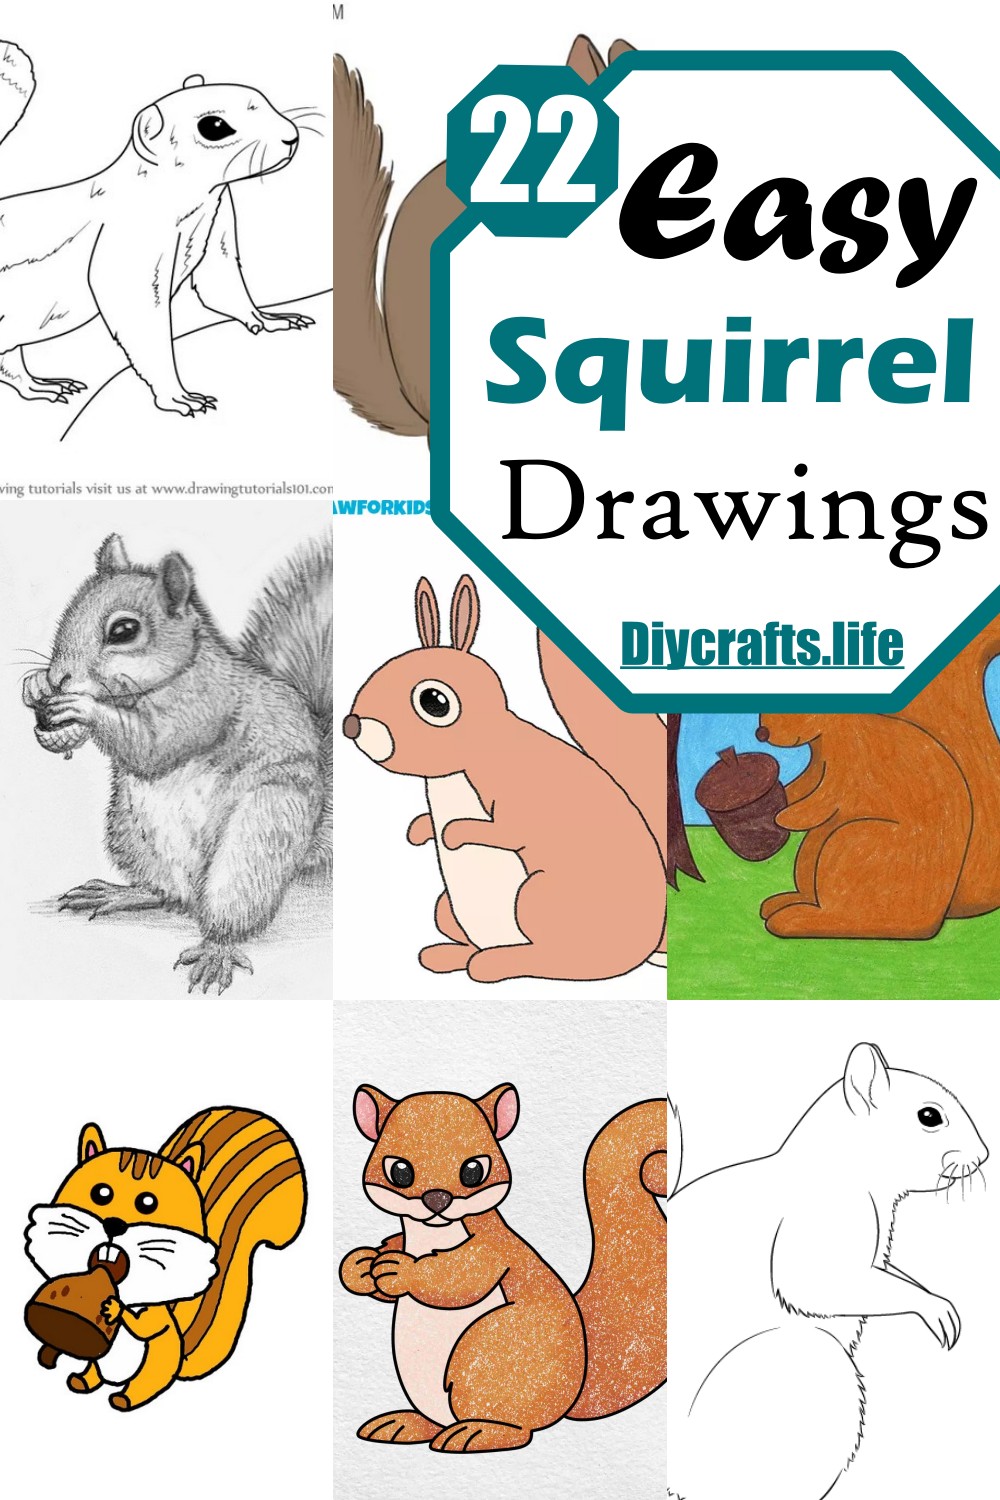 Squirrel Drawing Tutorial  How to draw Squirrel step by step